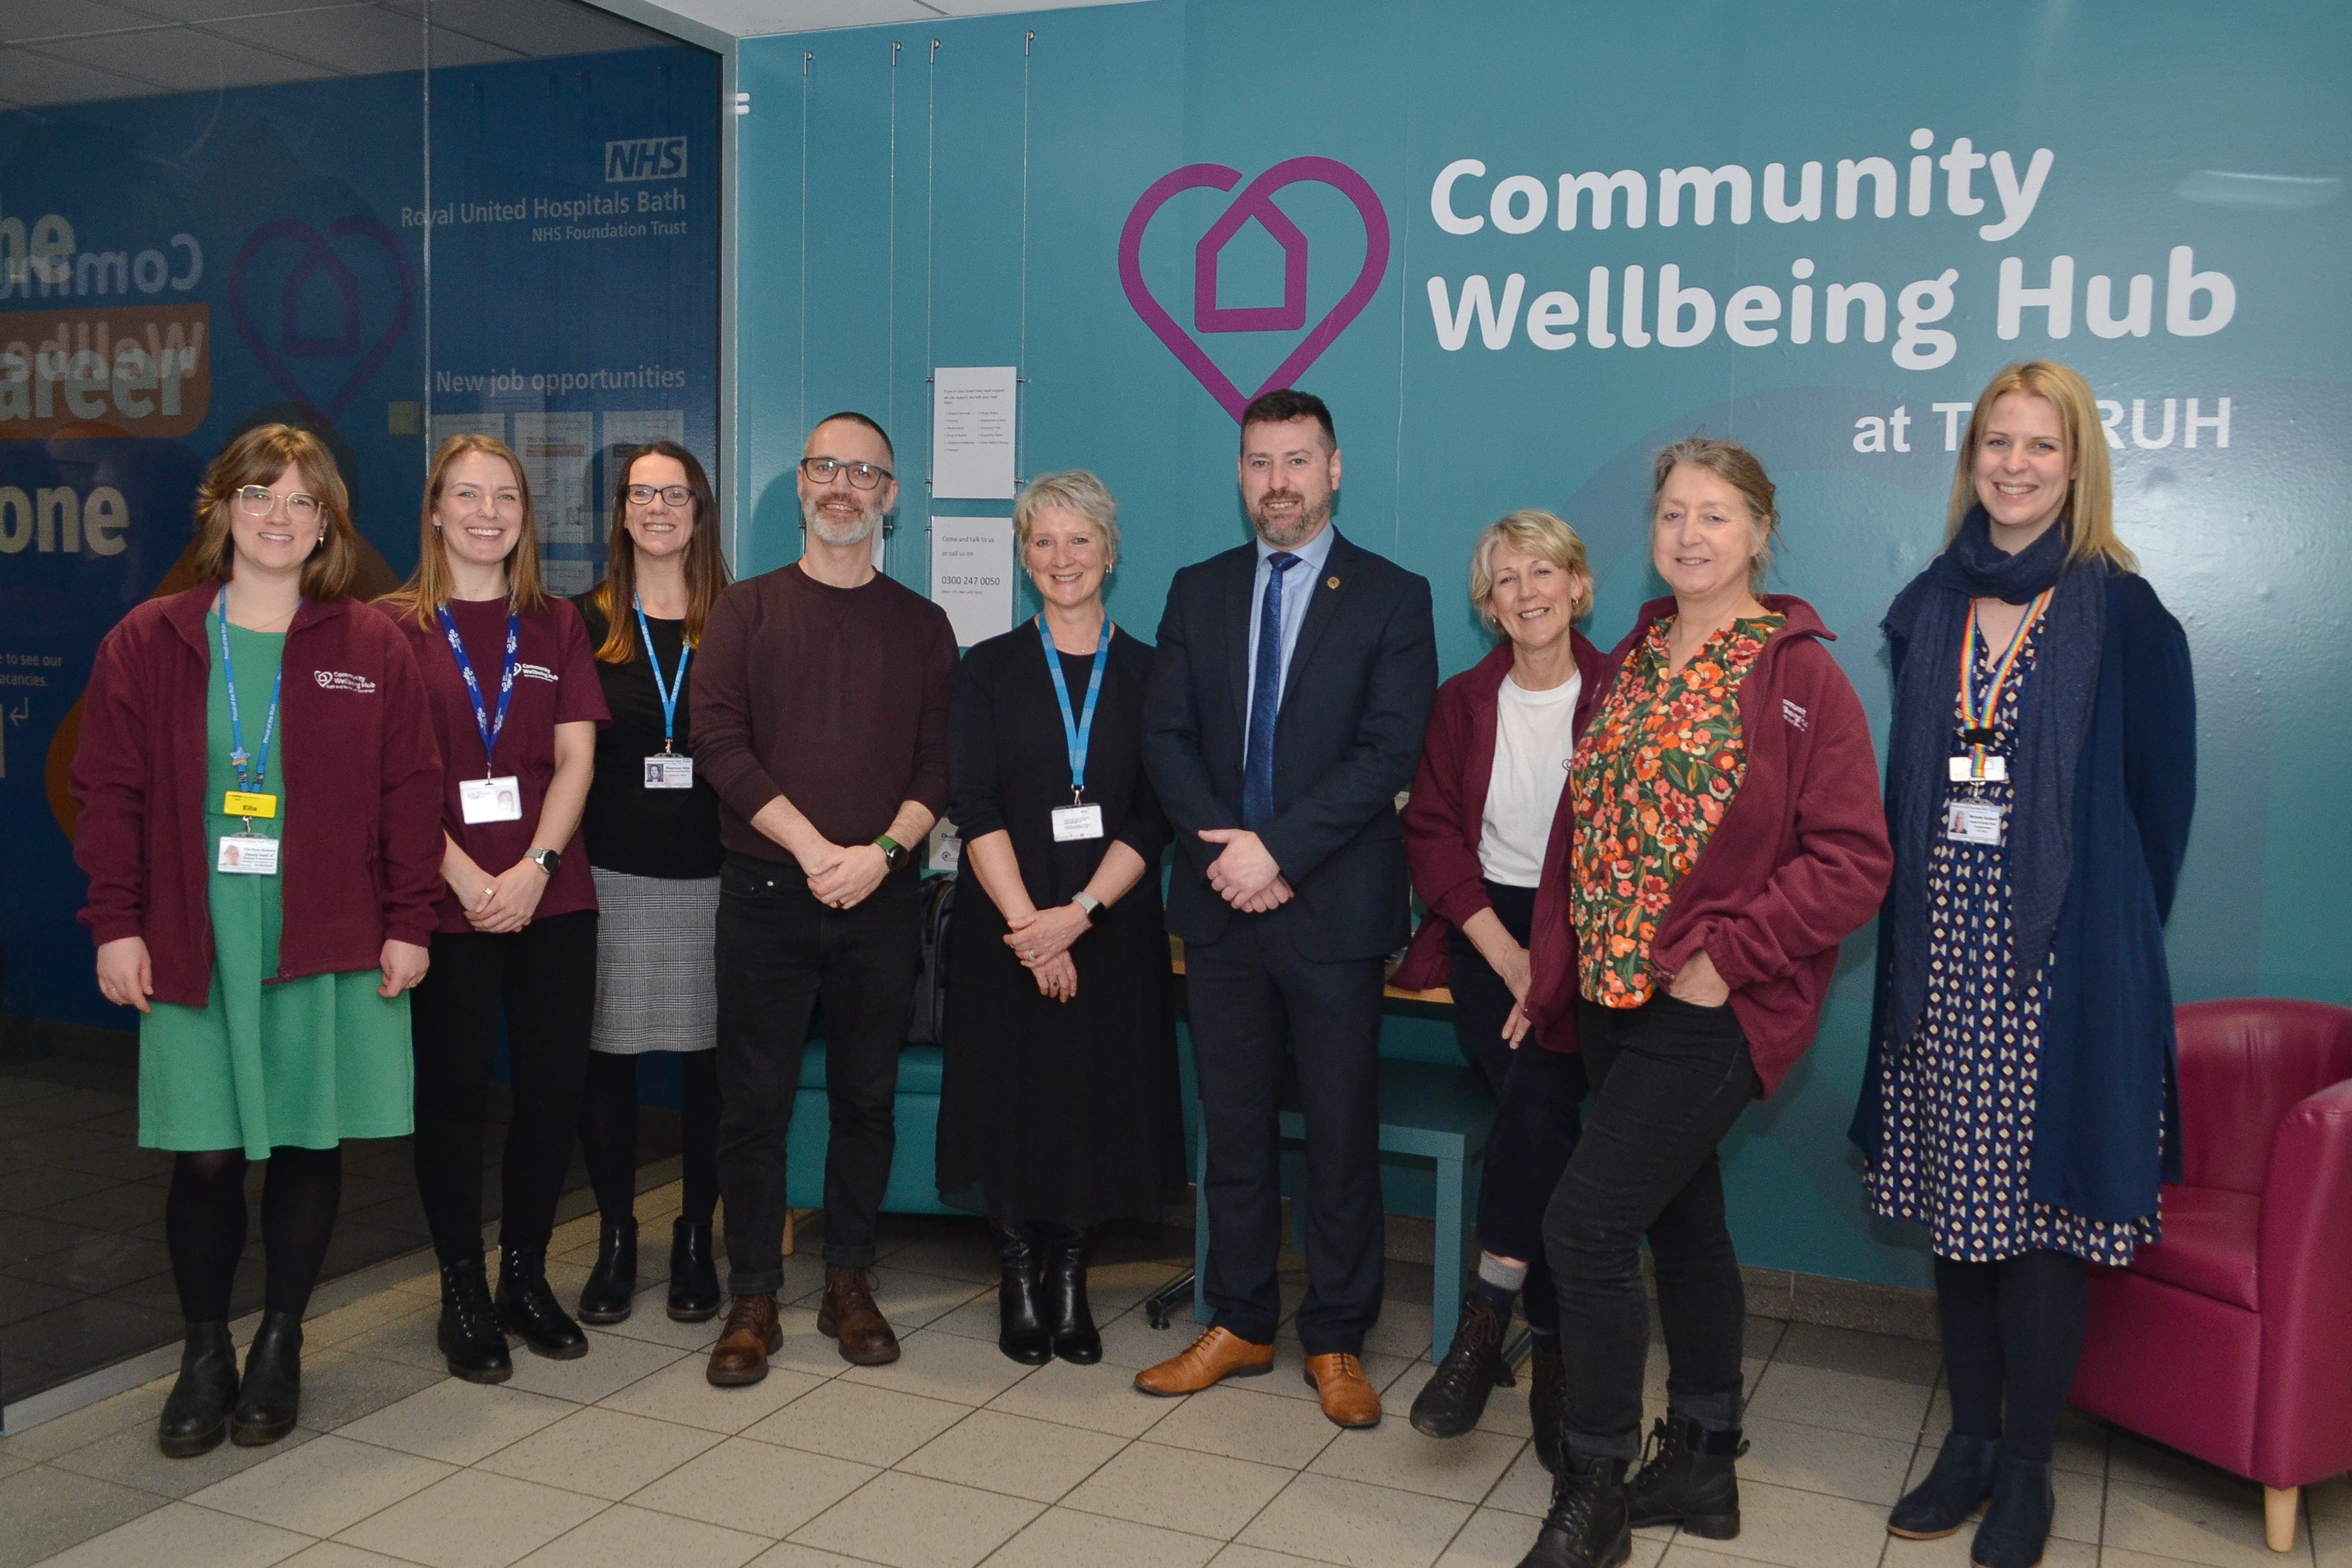 Community wellbeing hub outlet launches at Royal United Hospital